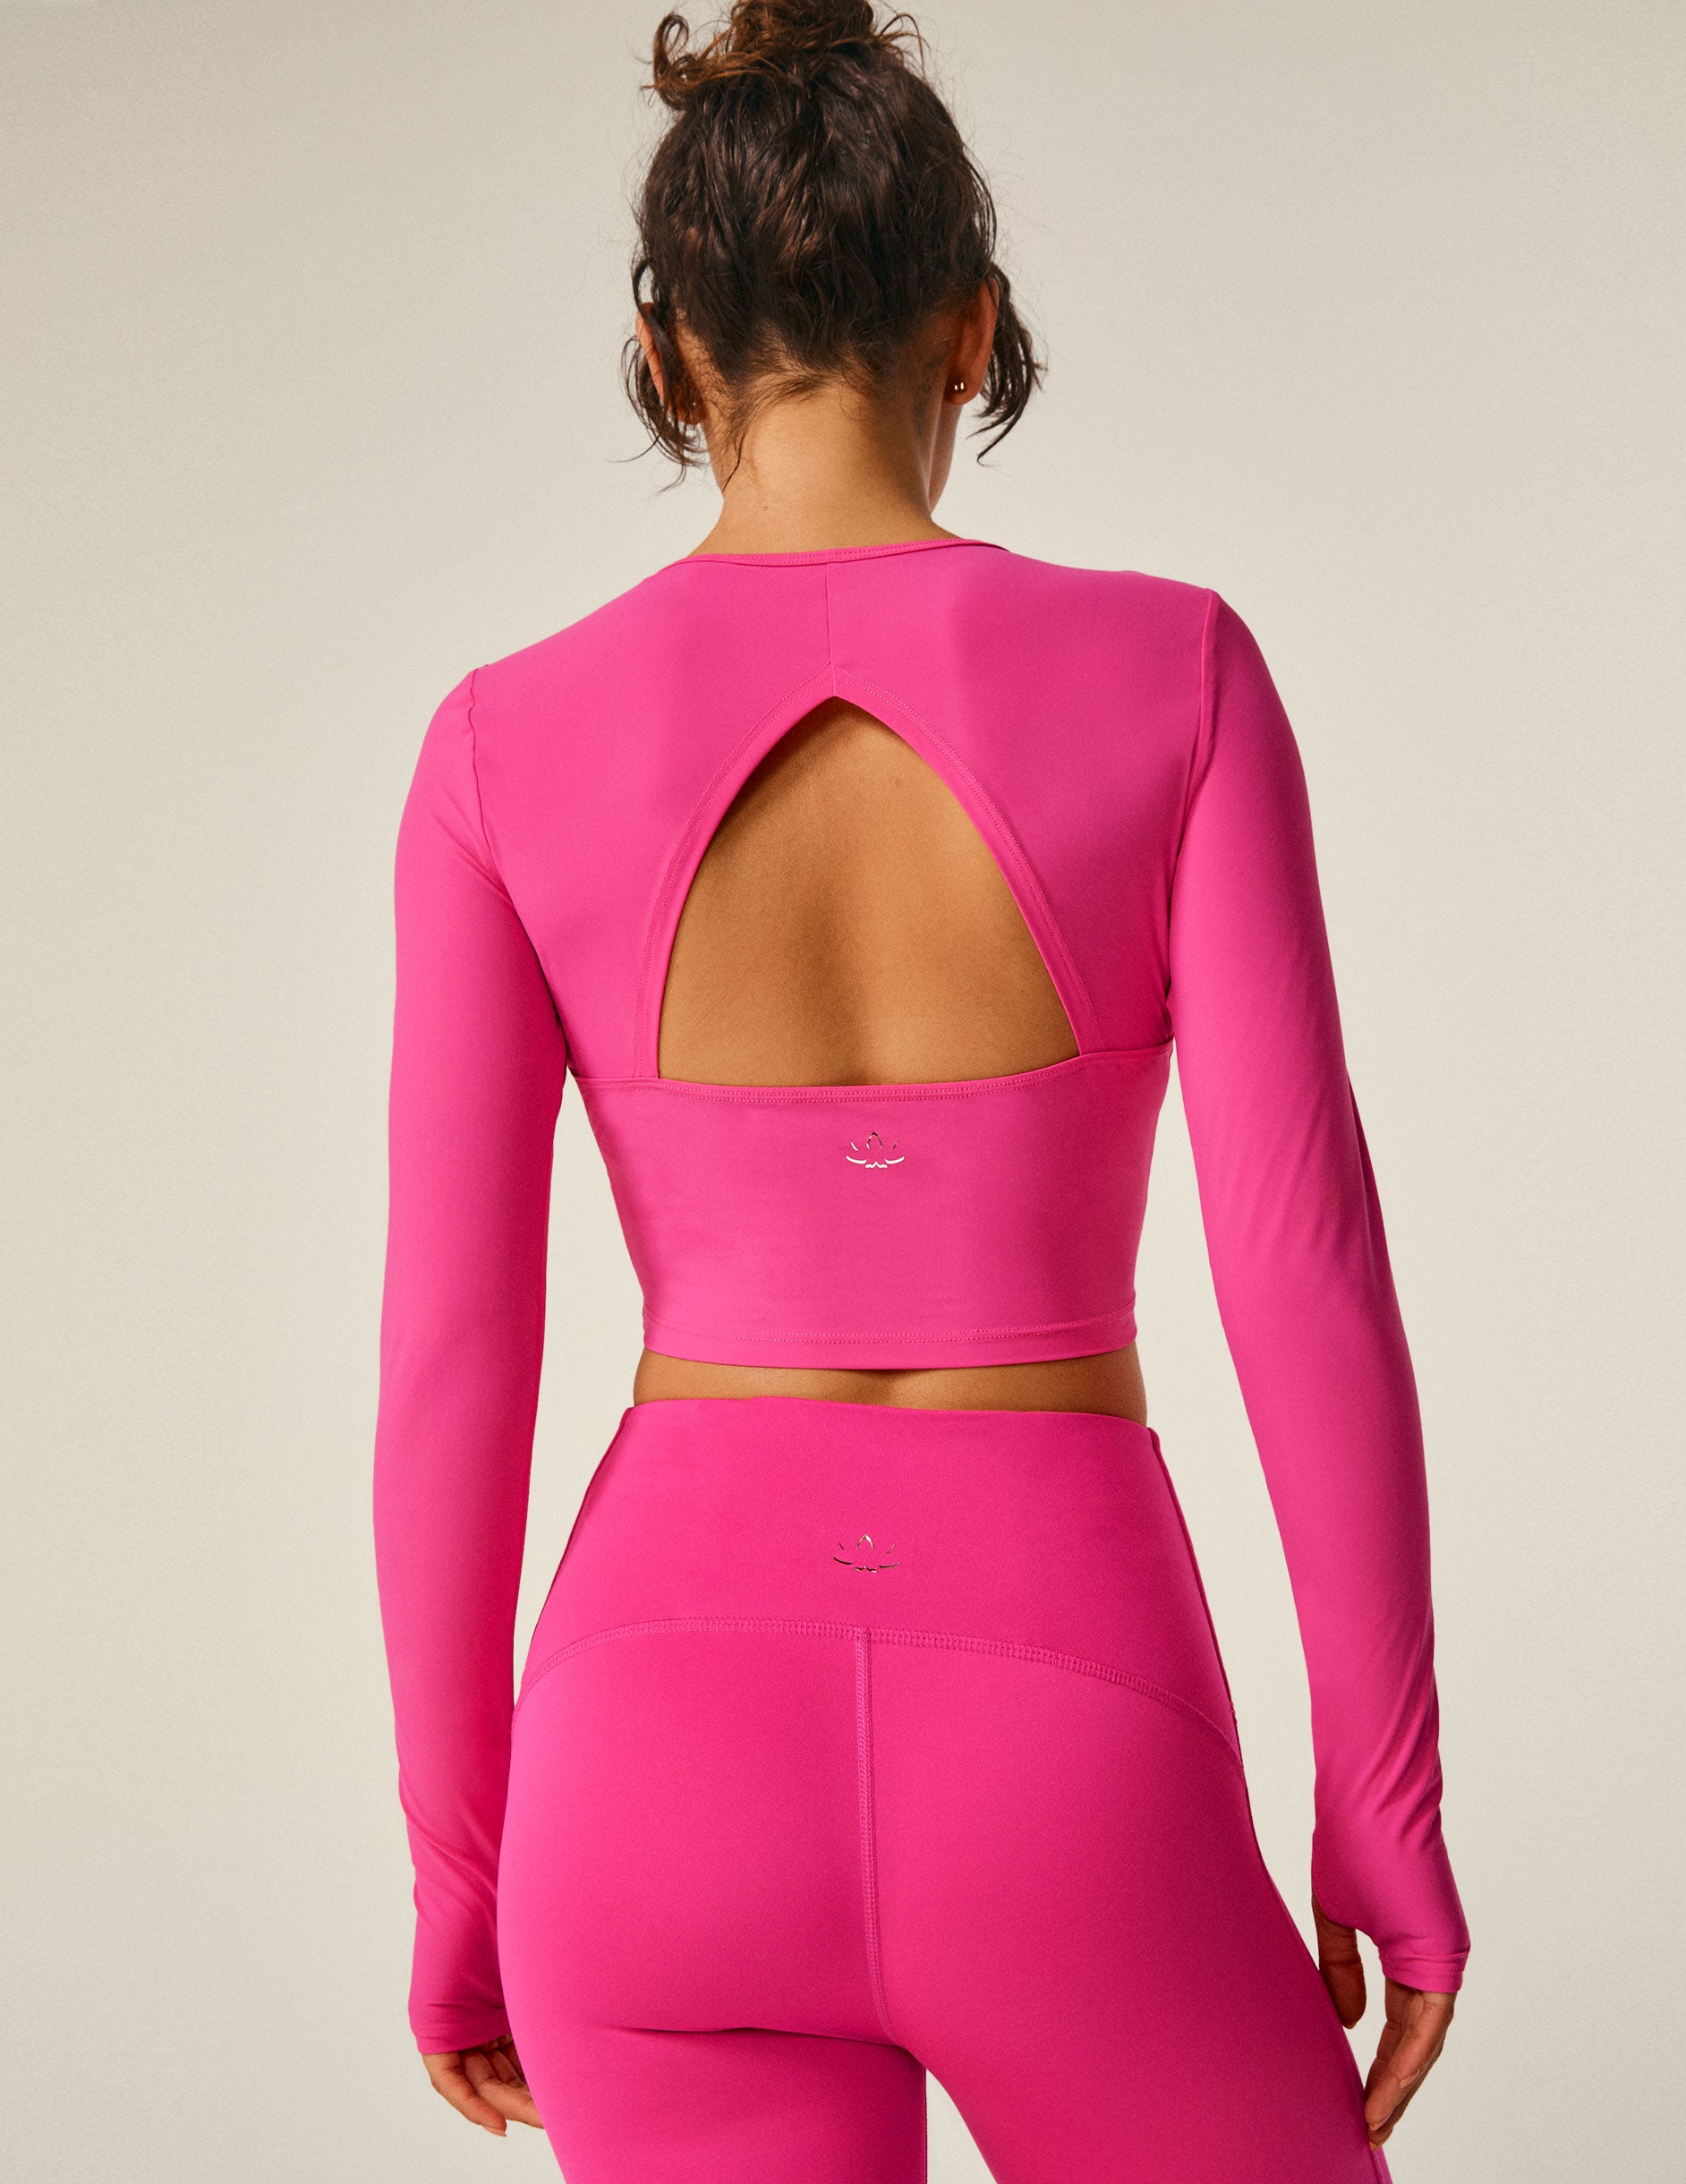 pink long sleeve cropped top with an open back detail.